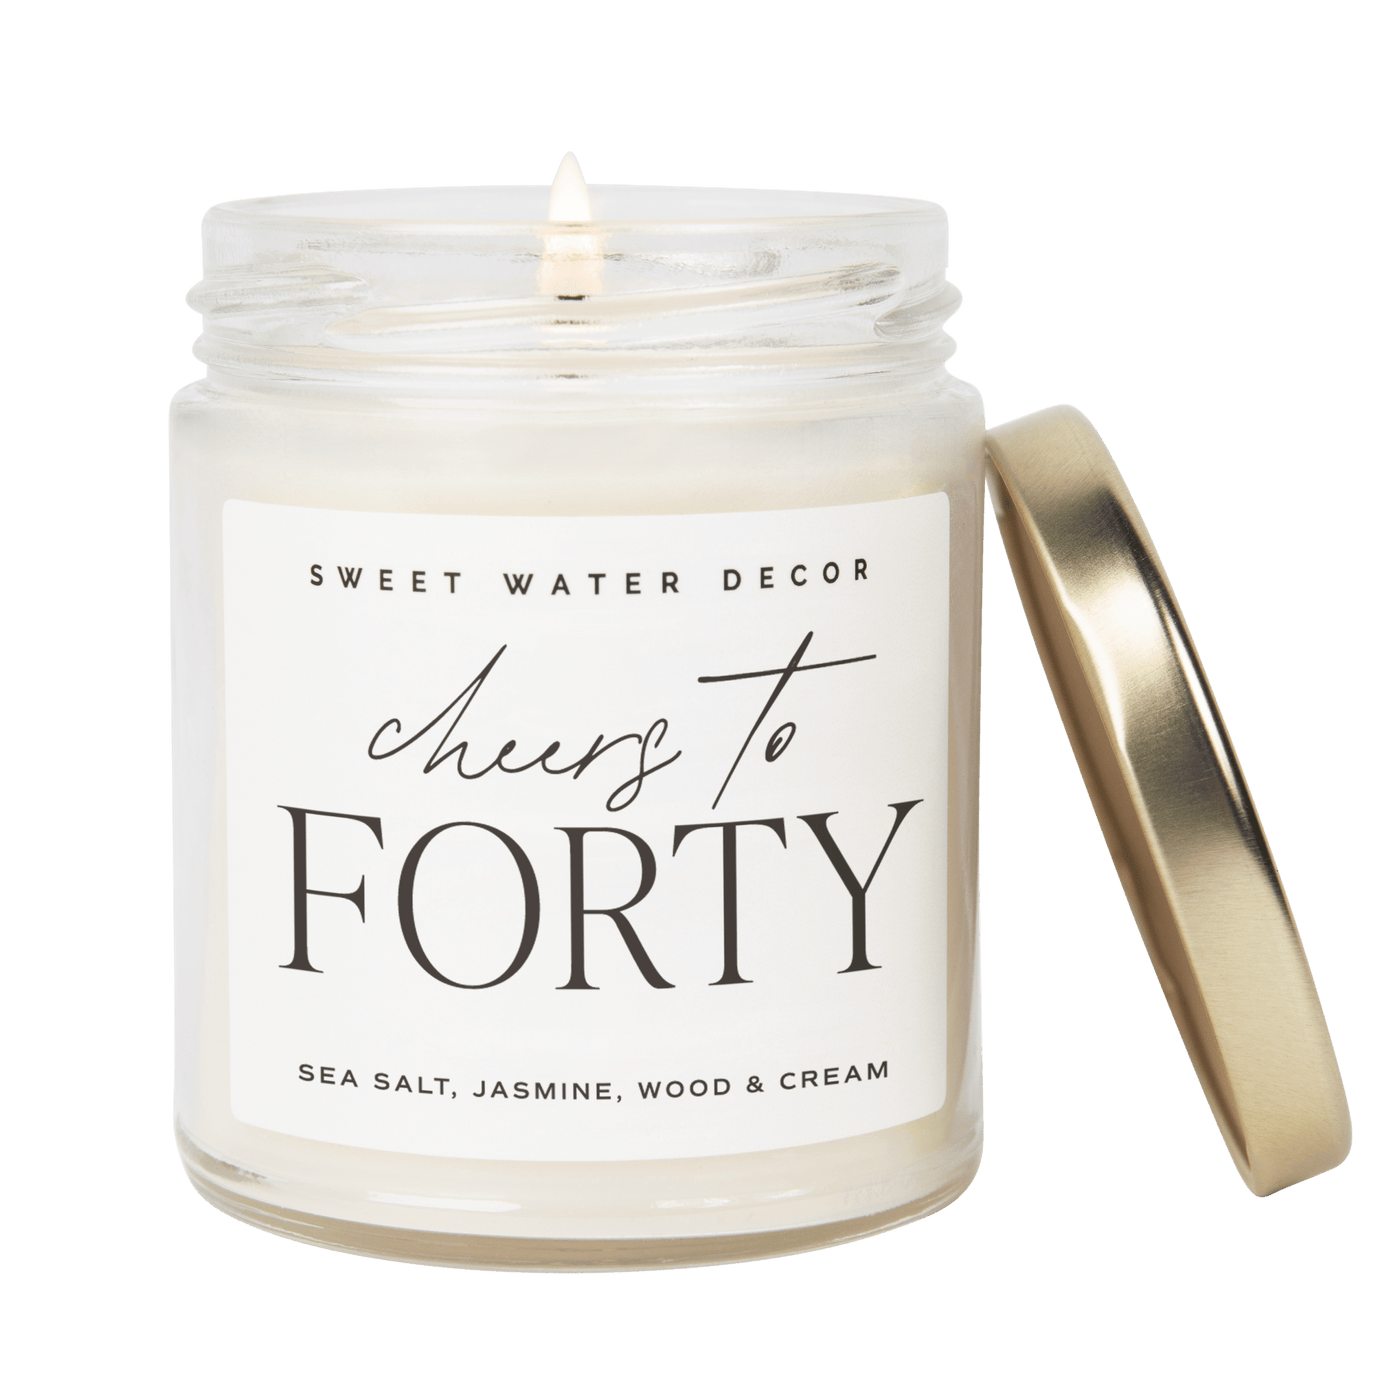 Cheers to Forty Soy Candle - Clear Jar - 9 oz - Sweet Water Decor - Candles